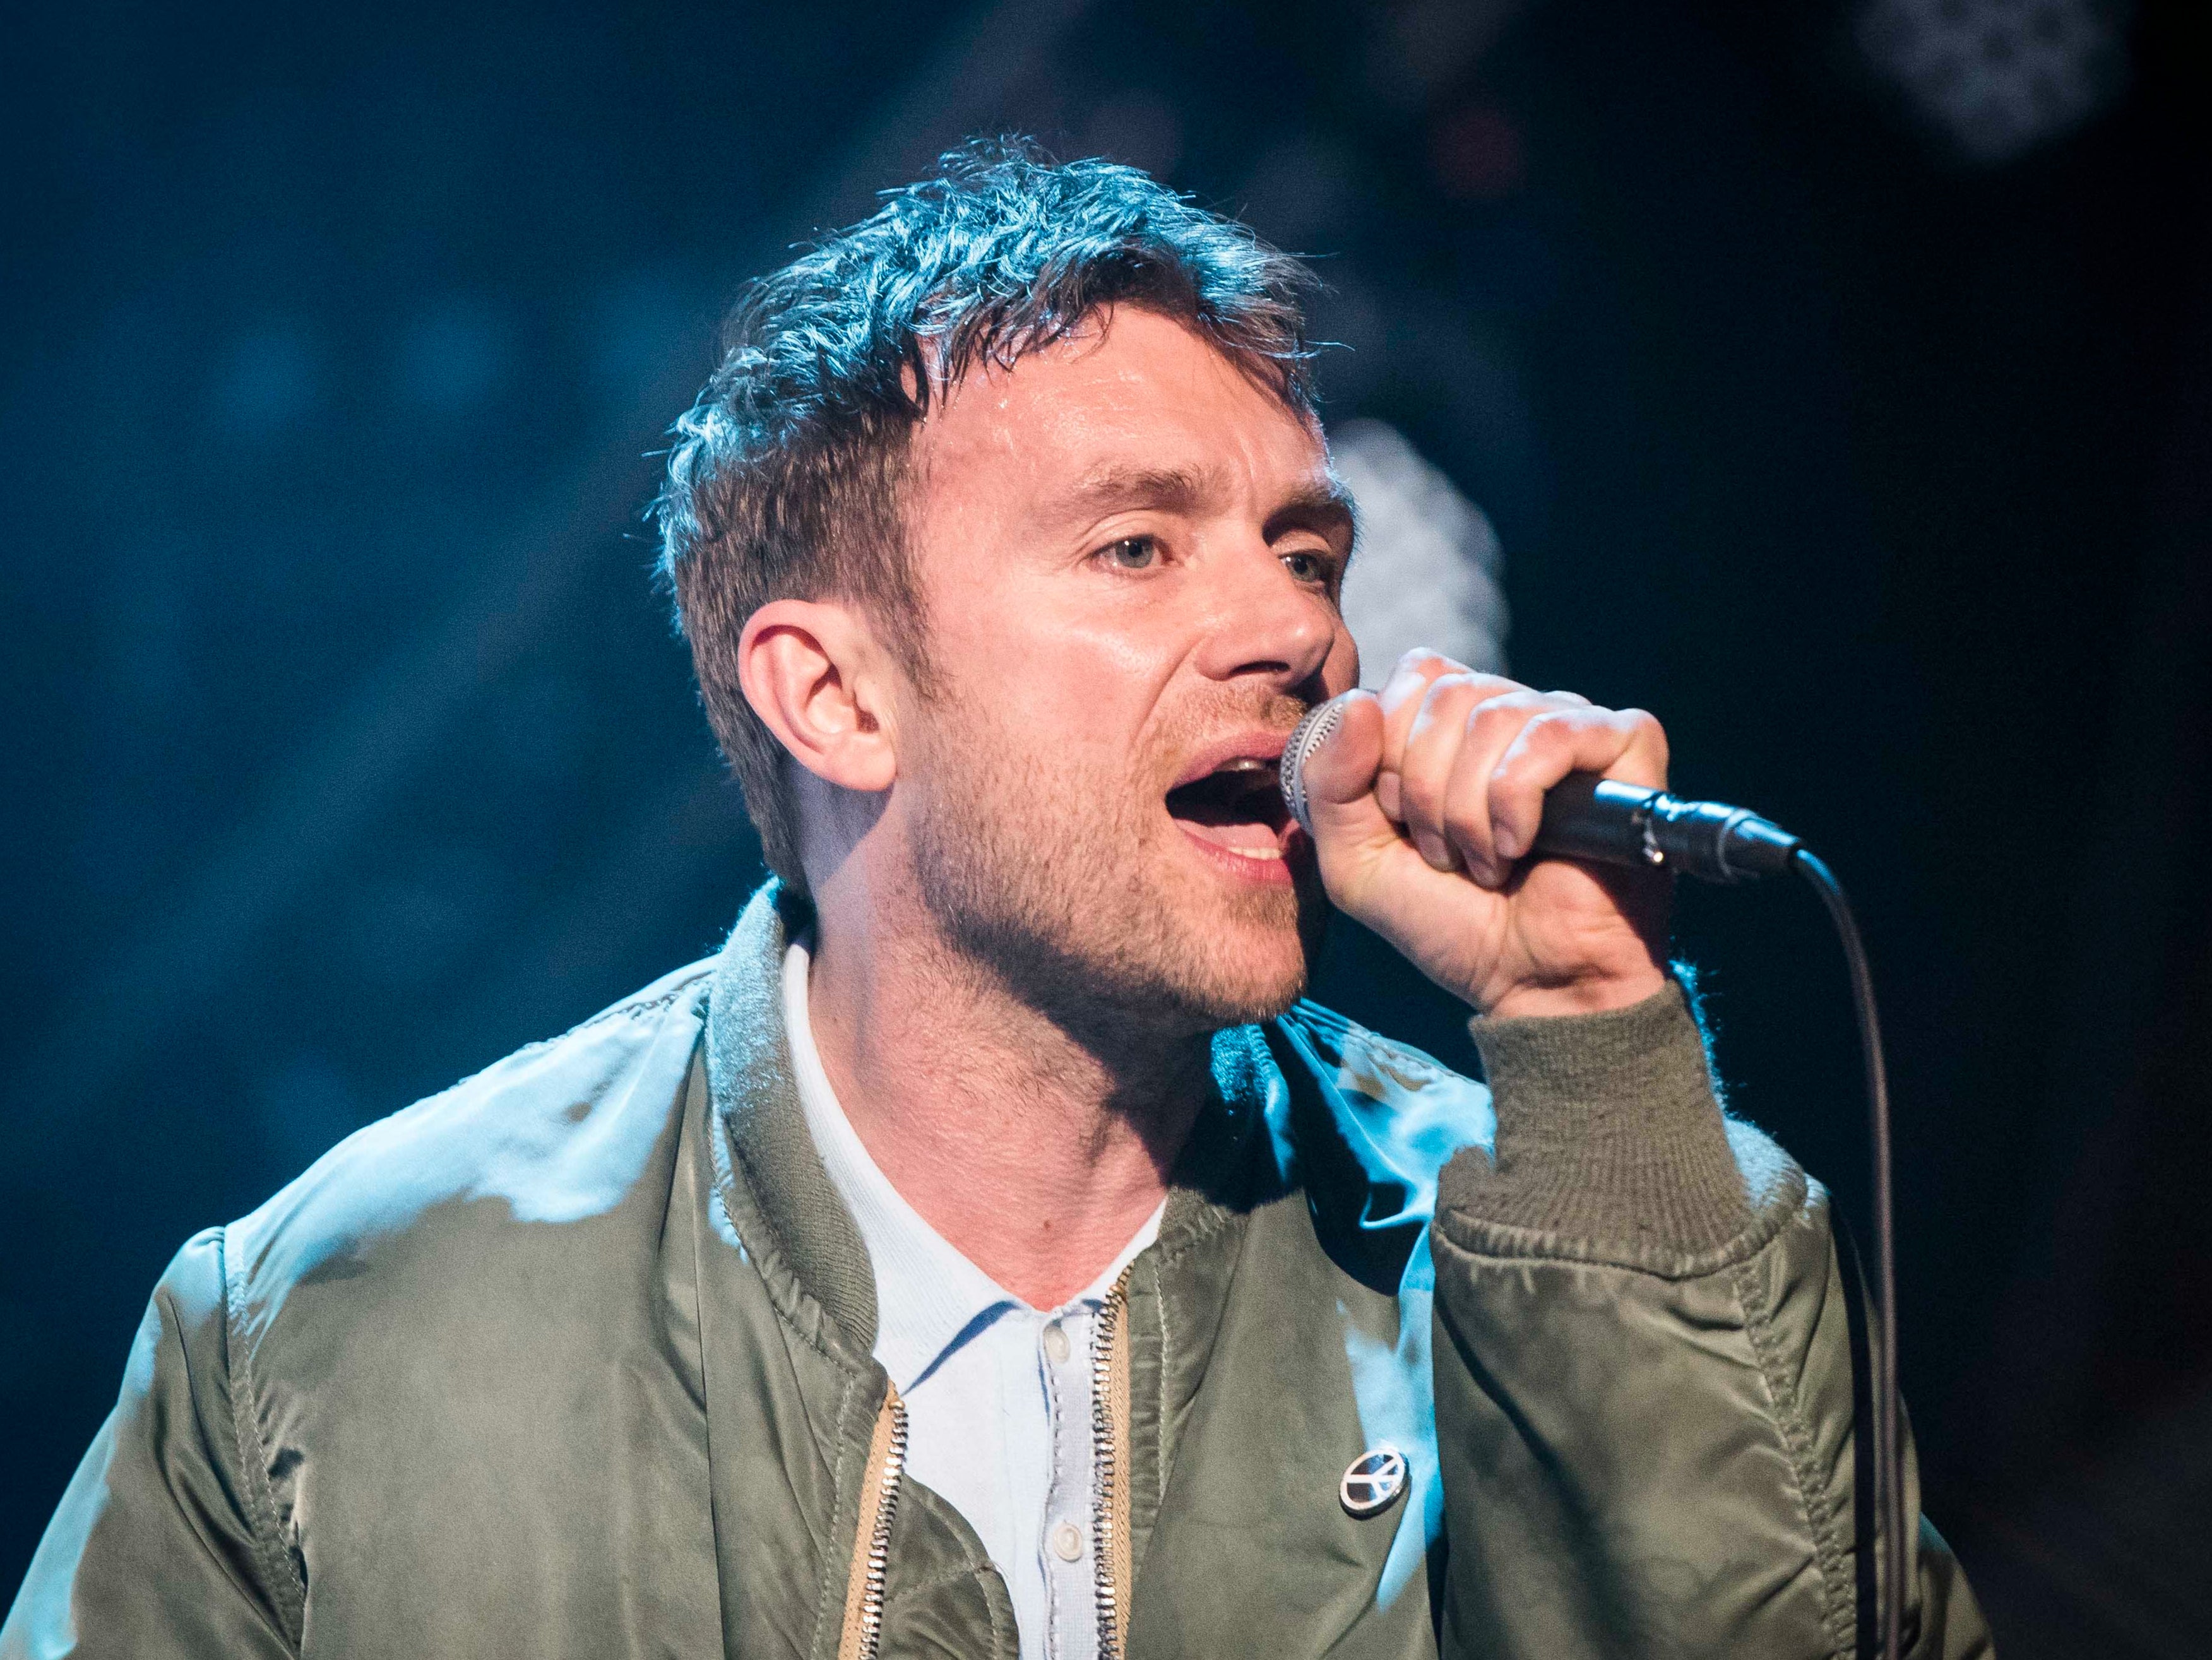 Damon Albarn of Blur has called Brexit a ‘tragedy’ for musicians